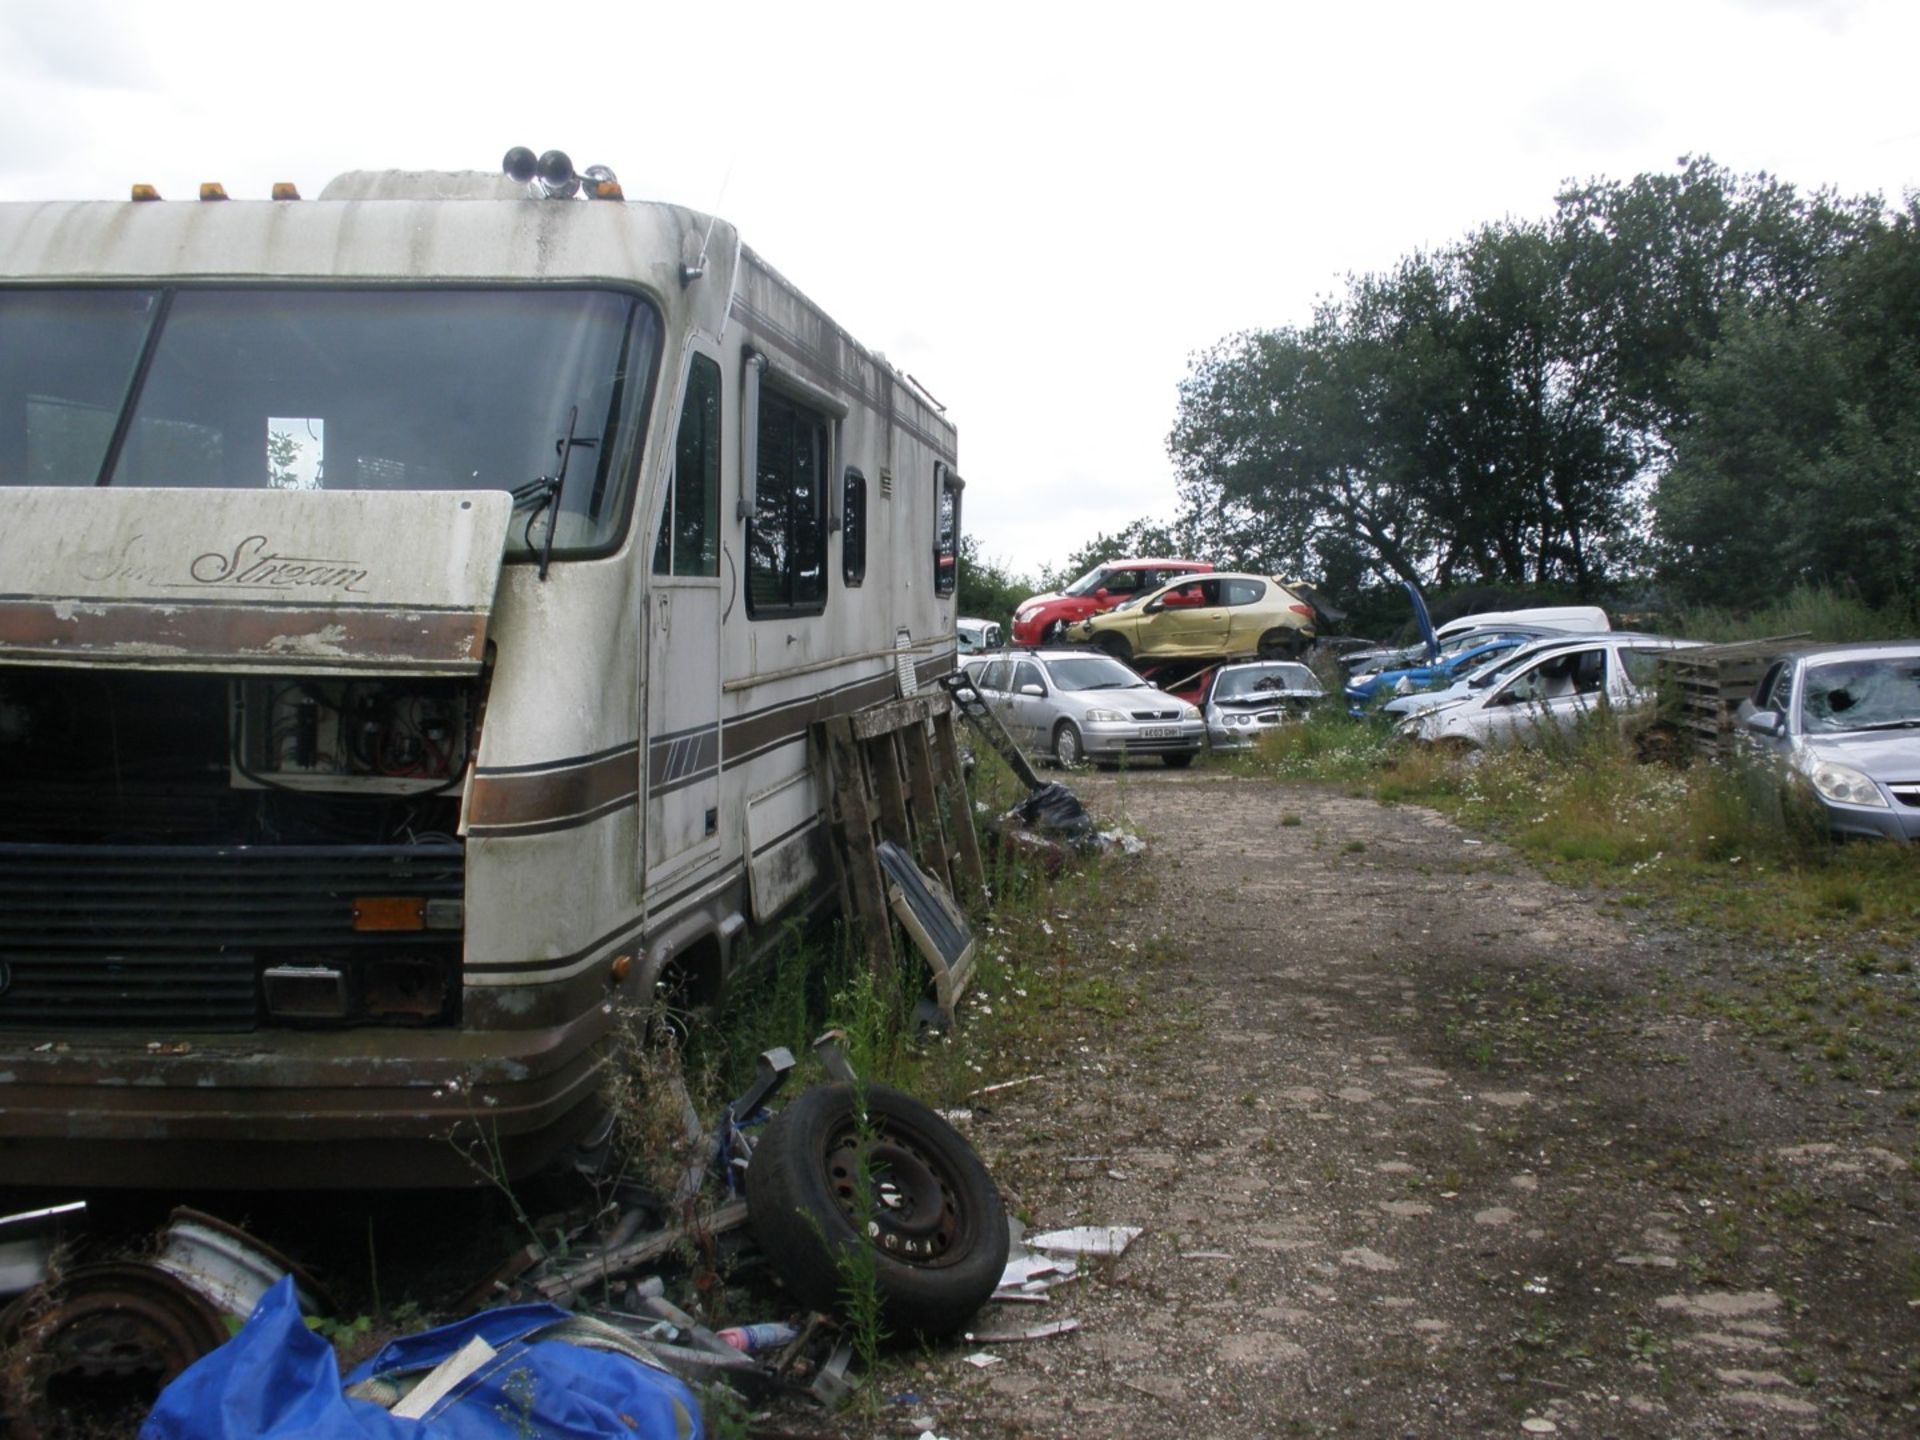 The Residual Scrap Vehicles on site together with other scrap hidden in the undergrowth. To include - Image 6 of 10